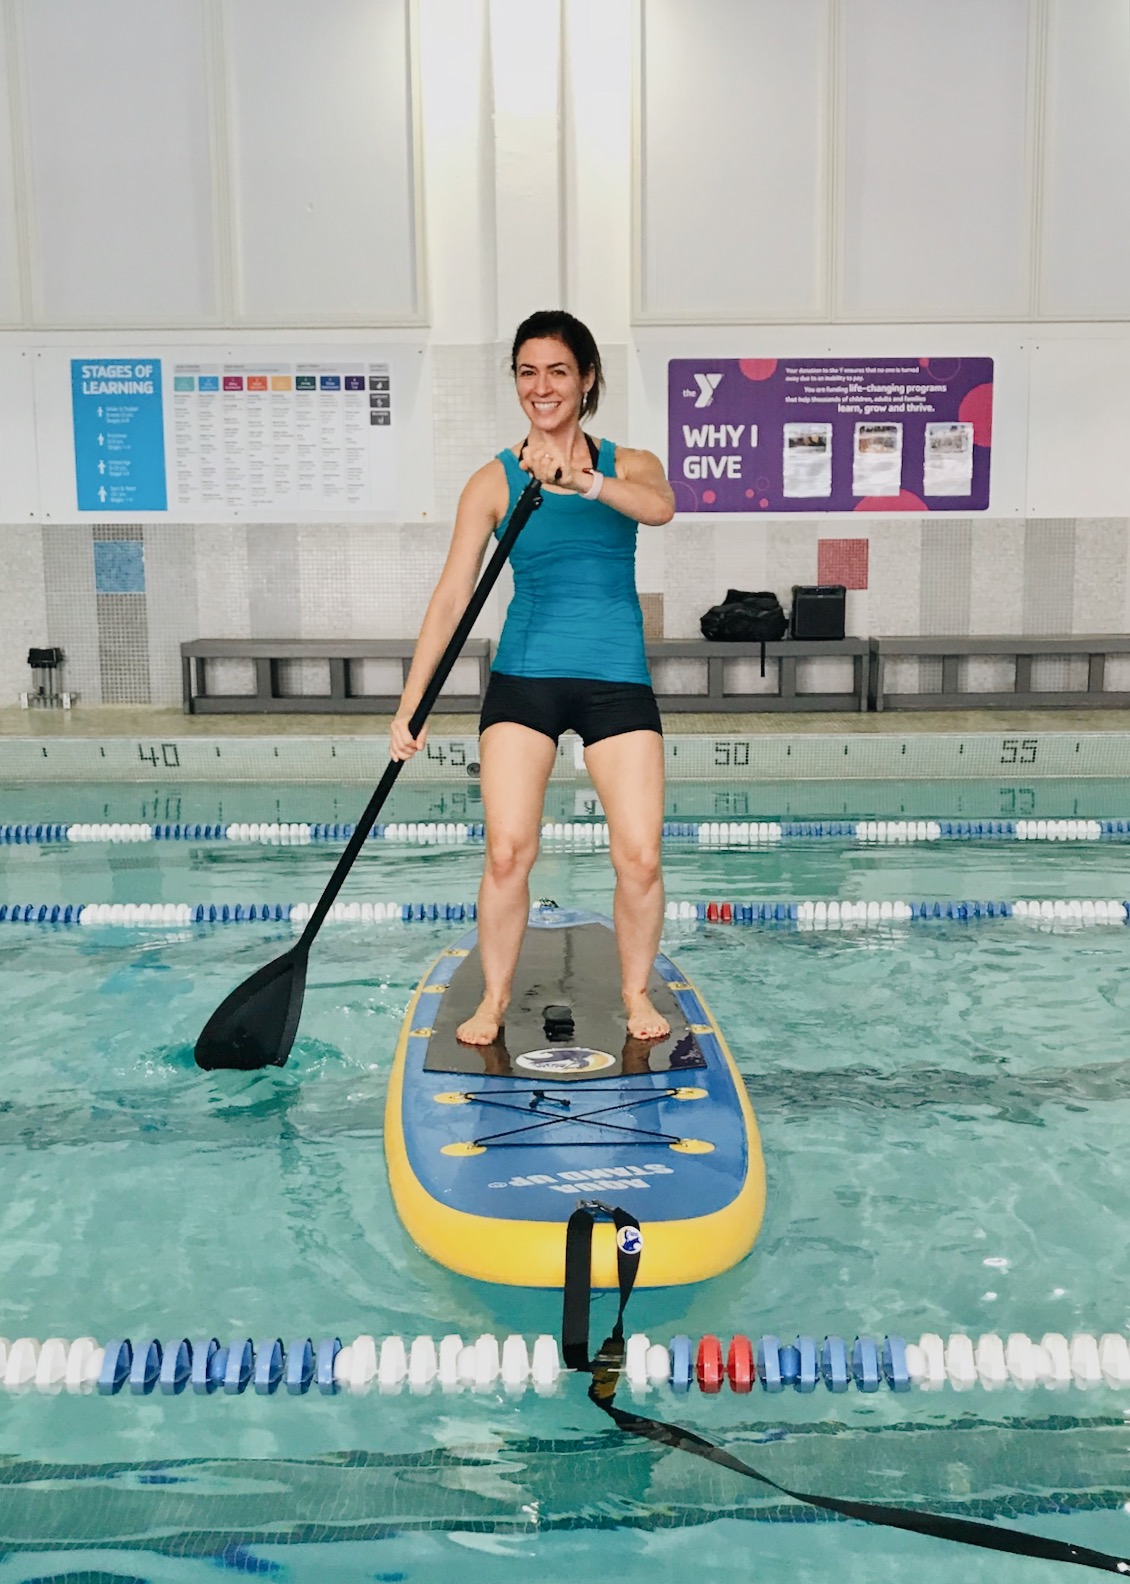 What to expect at a SUP exercise class - Aqua Stand Up group exercise - fitnessista.com #SUP #SUPexercise #SUPfitness #groupexercise